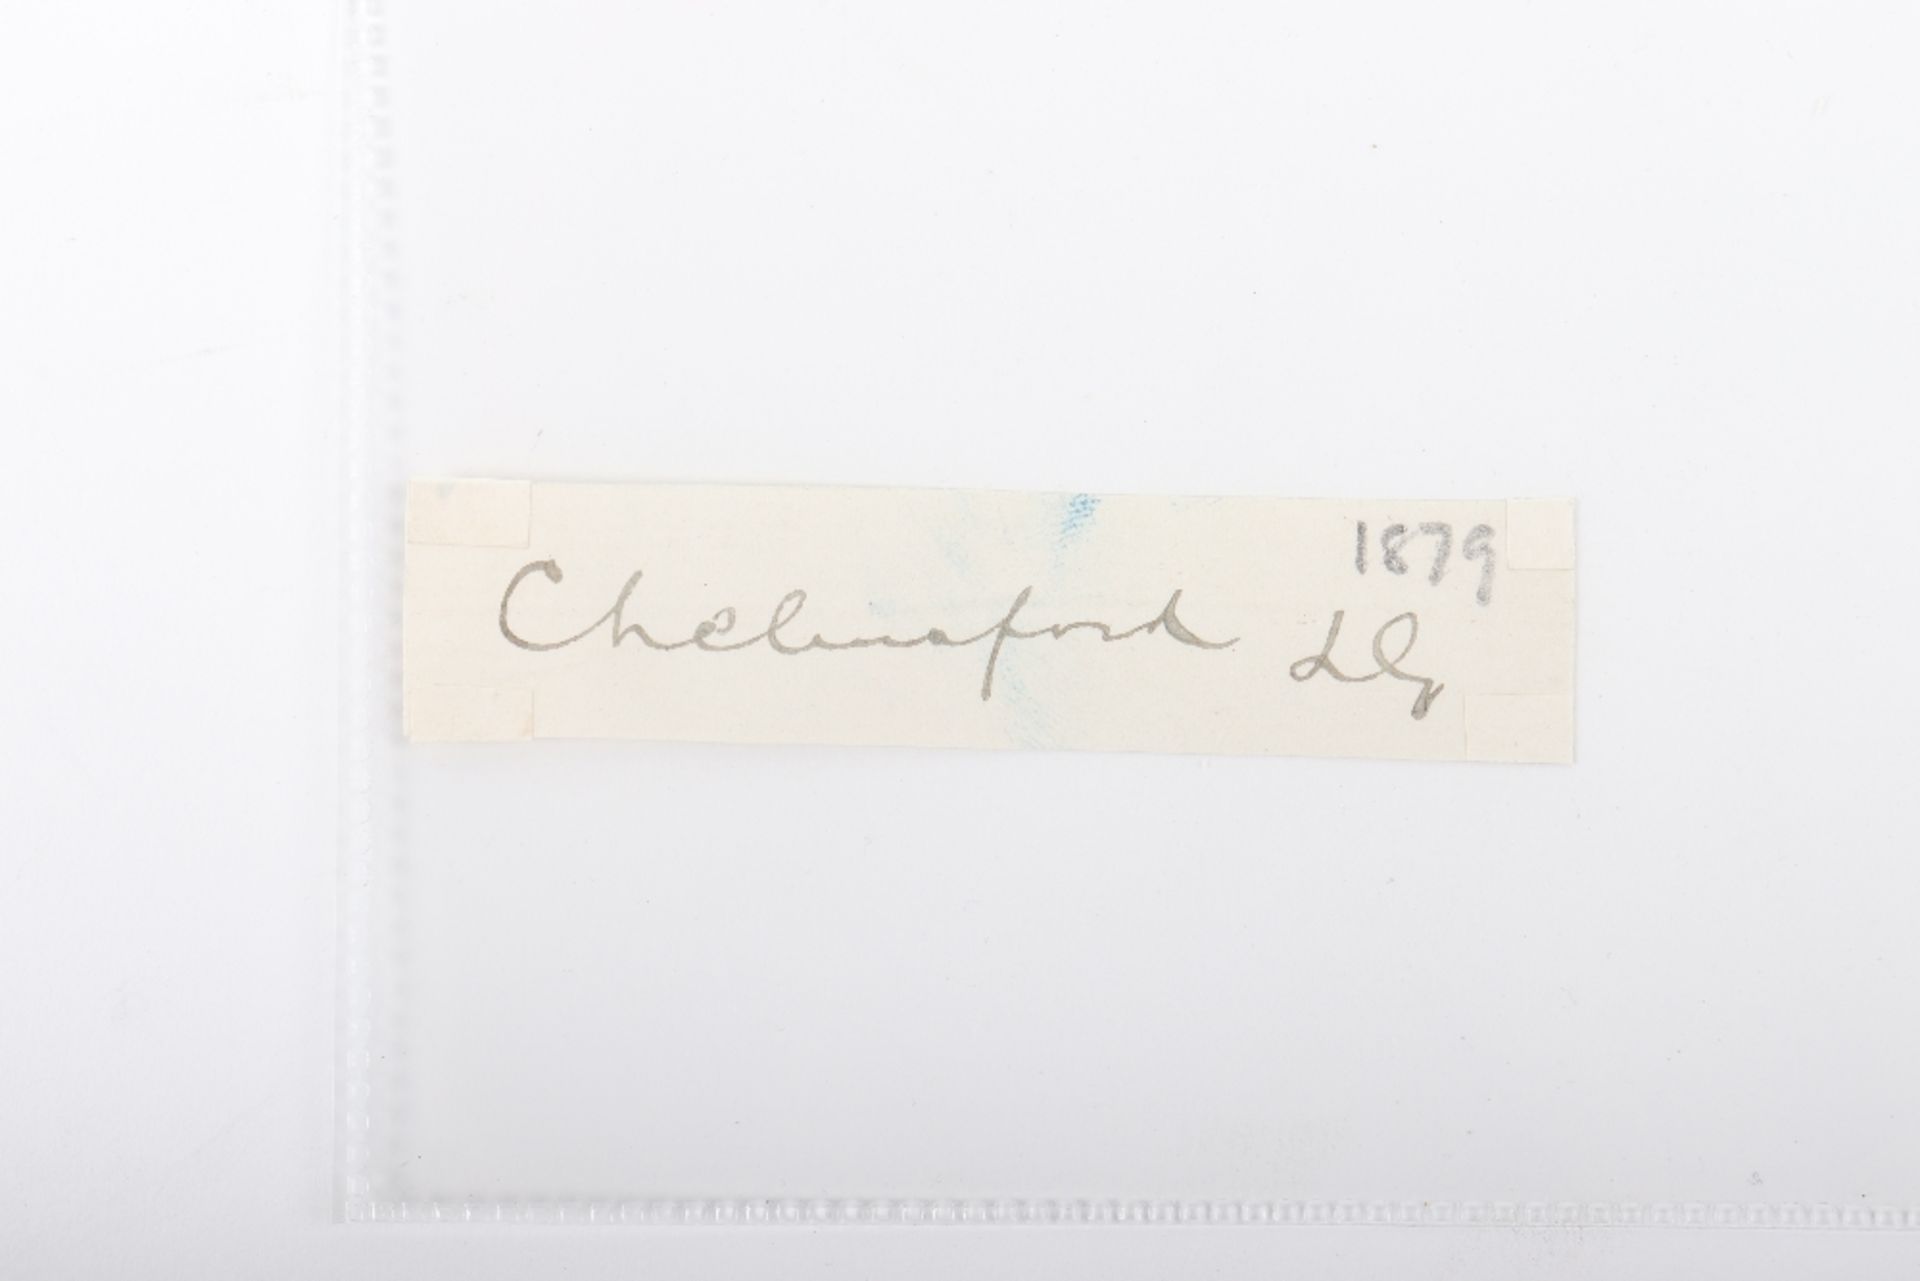 Zulu Wars – Lord Chelmsford Signature - Image 2 of 2